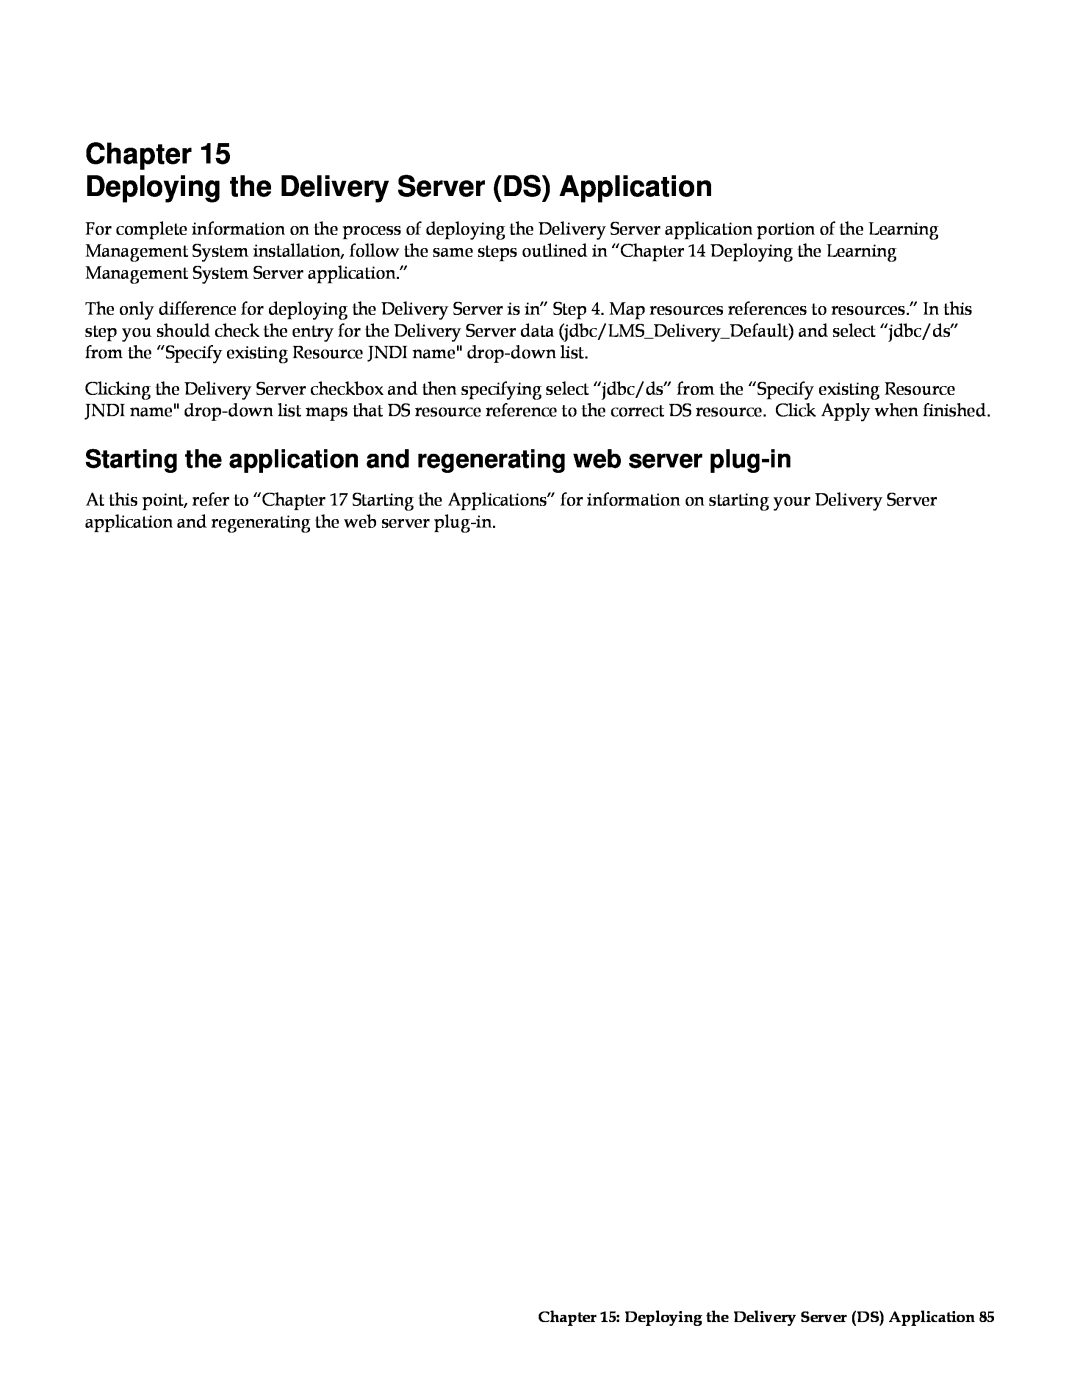 IBM G210-1784-00 manual Chapter Deploying the Delivery Server DS Application 